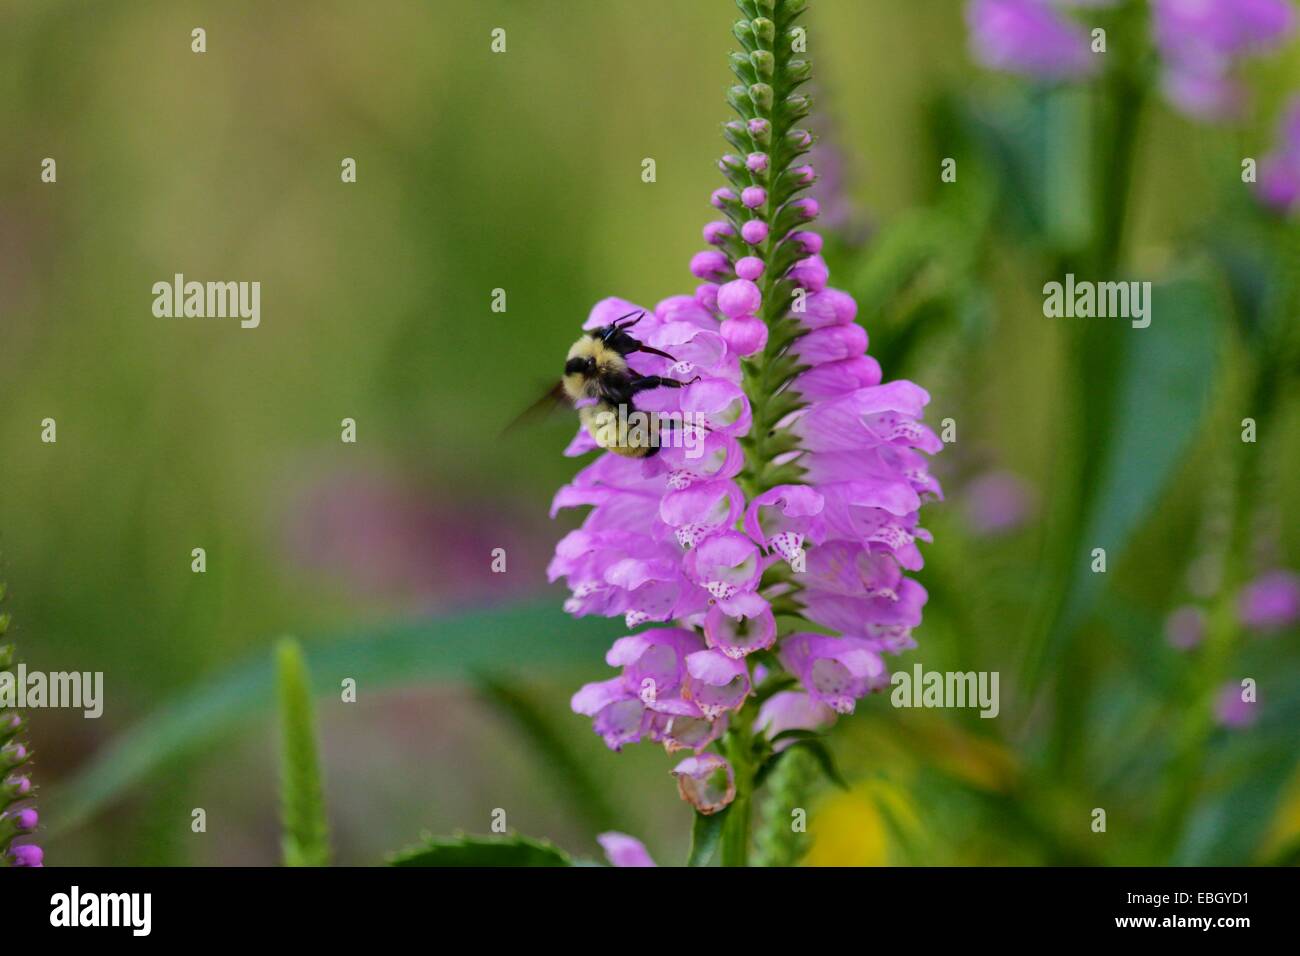 Bumble bee on obedient plant flower. Stock Photo